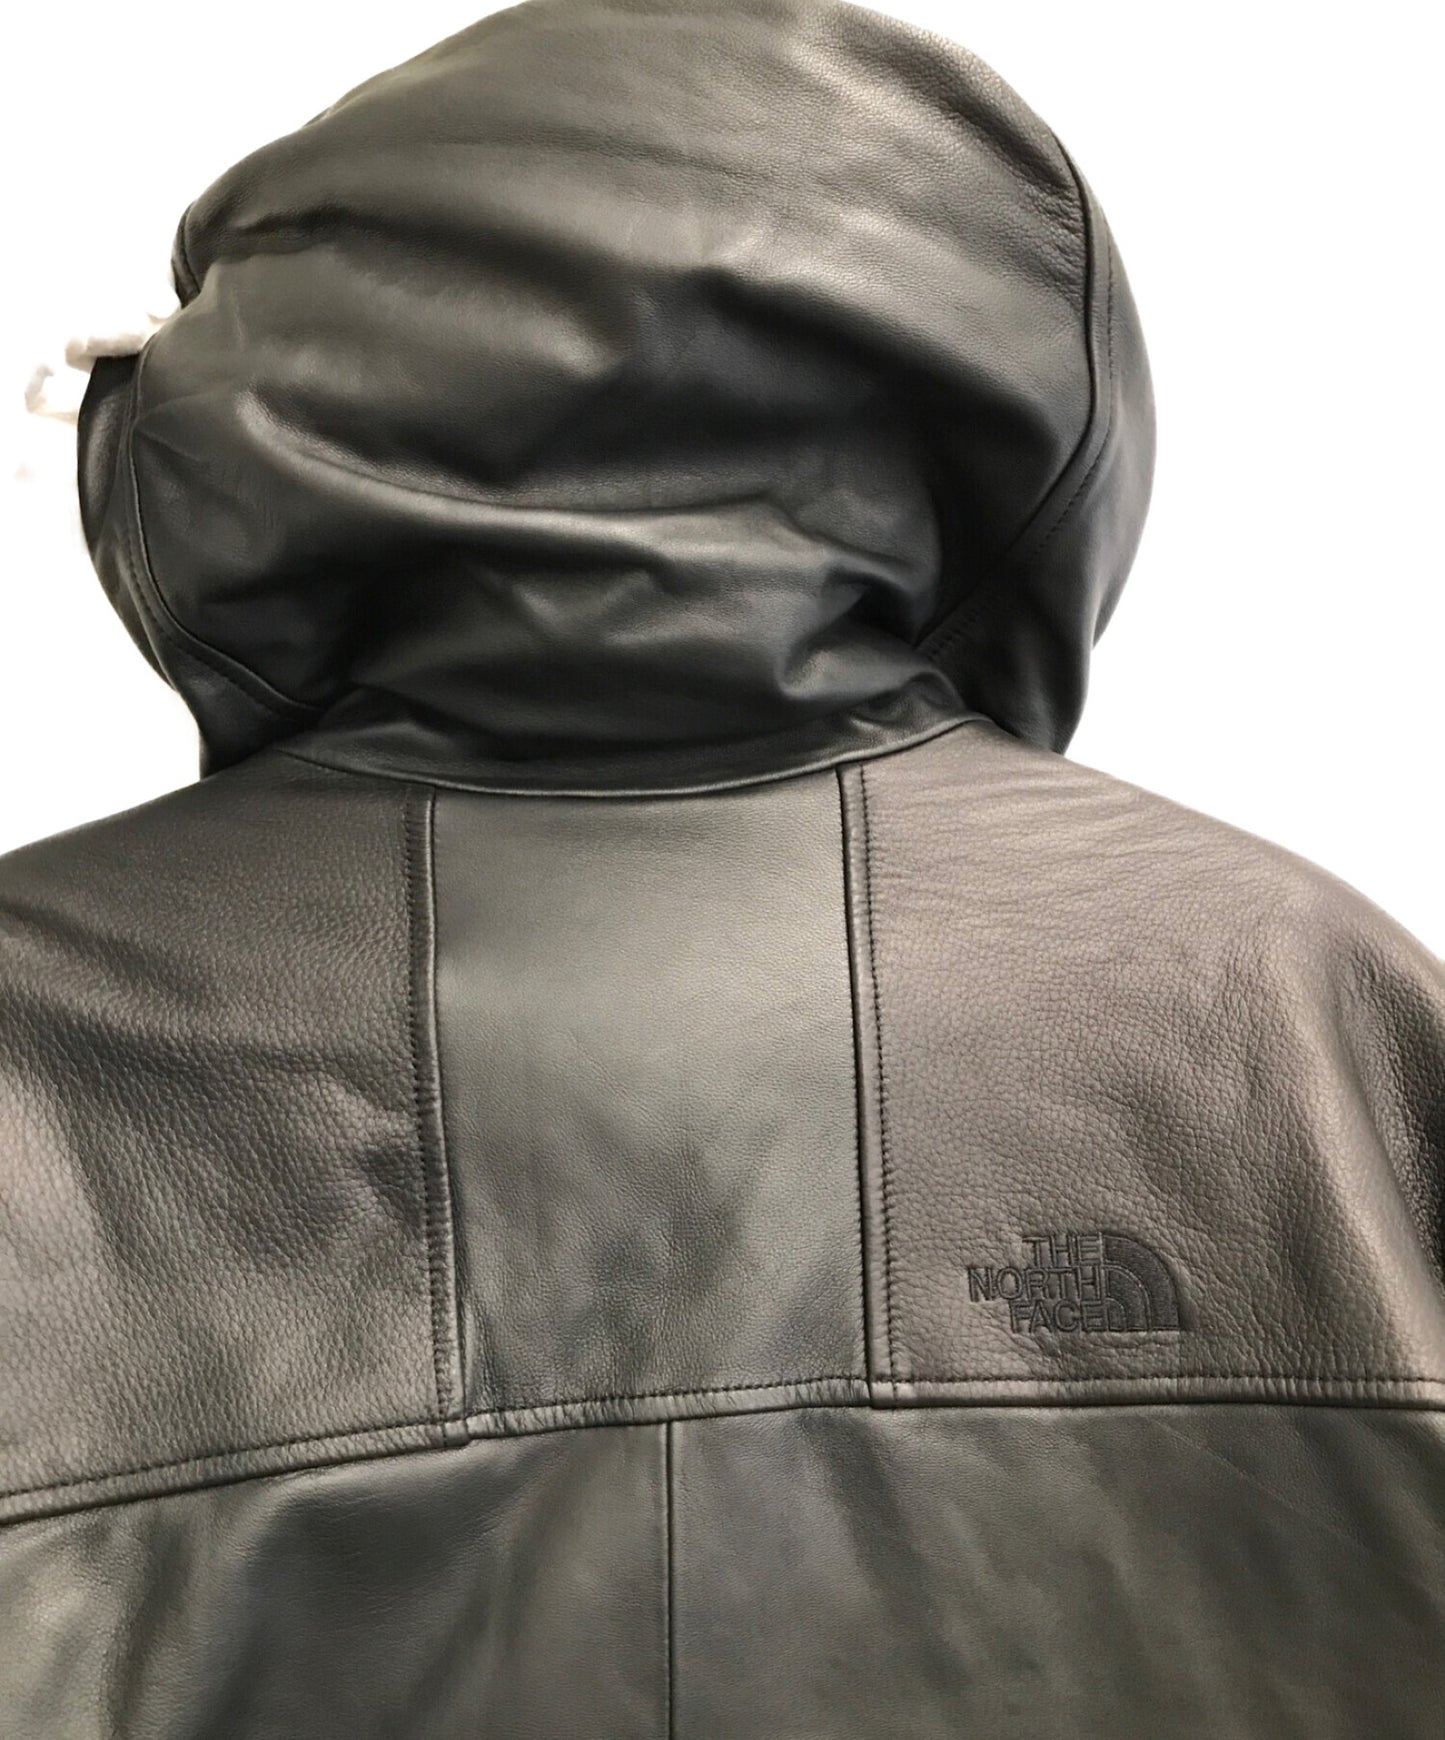 [Pre-owned] THE NORTHFACE PURPLELABEL Mountain Down Leather Jacket / Leather Jacket / Mountain Jacket / Hooded Jacket / Down Jacket / Outerwear ND2868N